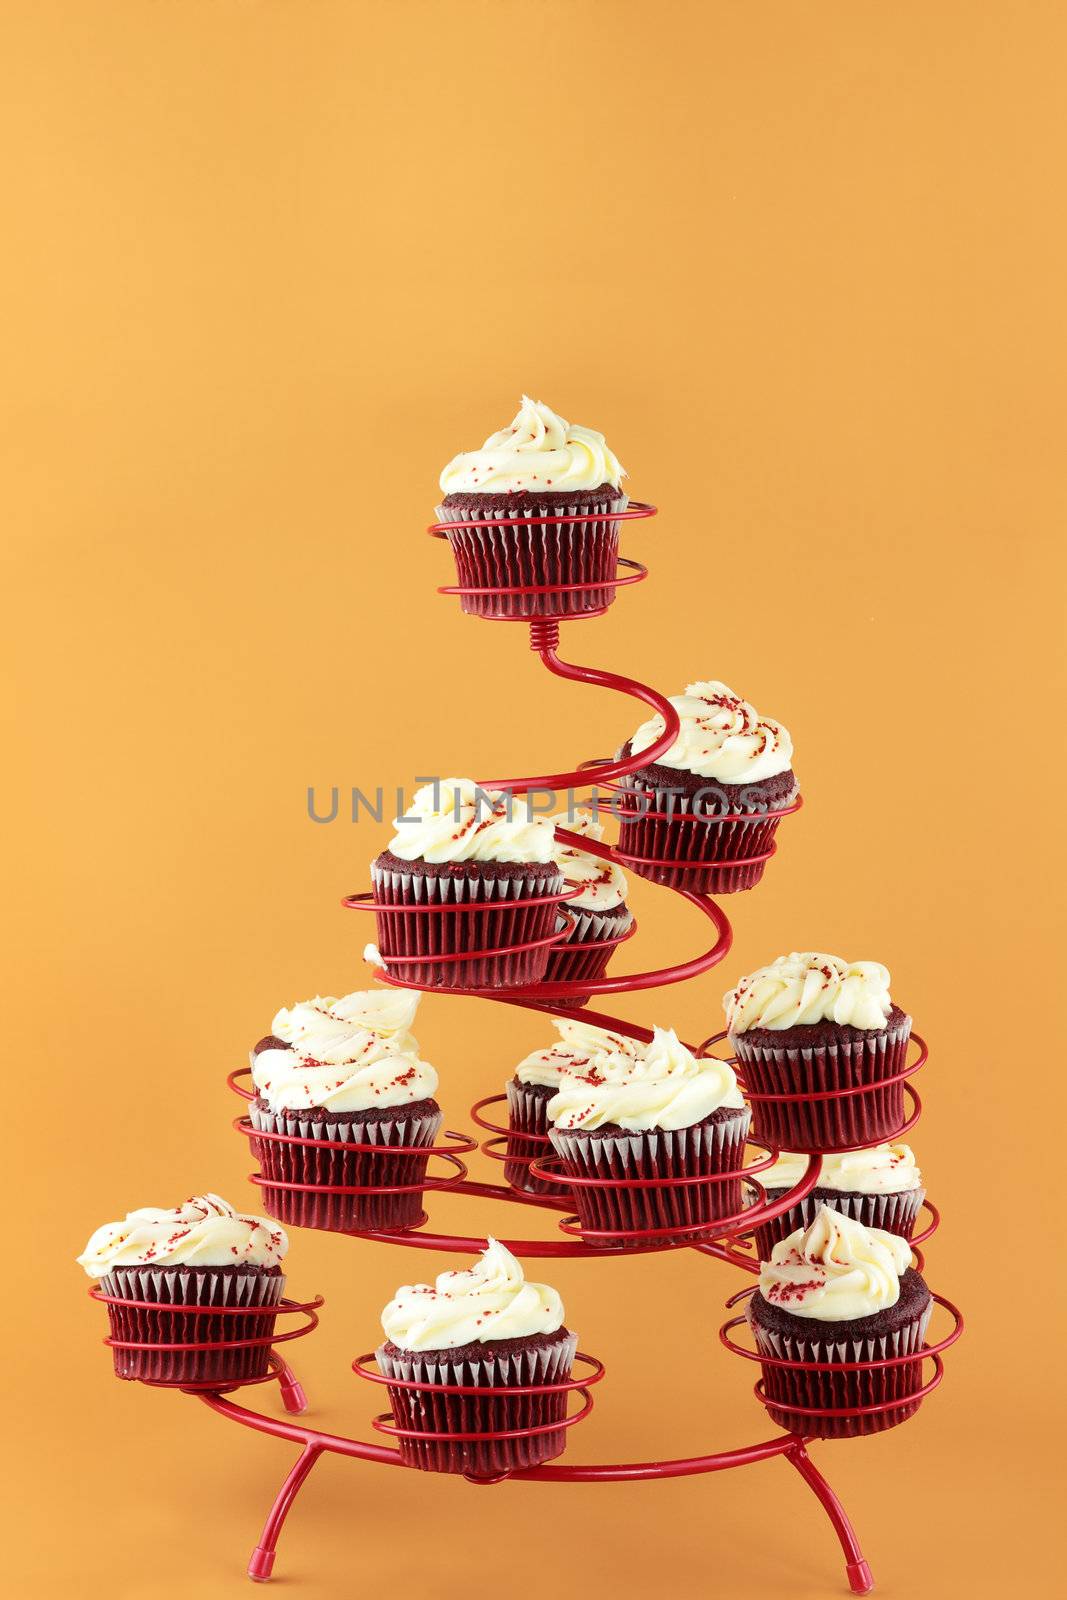 Red velvet cupcakes in a red cupcake holder against a yellowish orange background with copy space included.